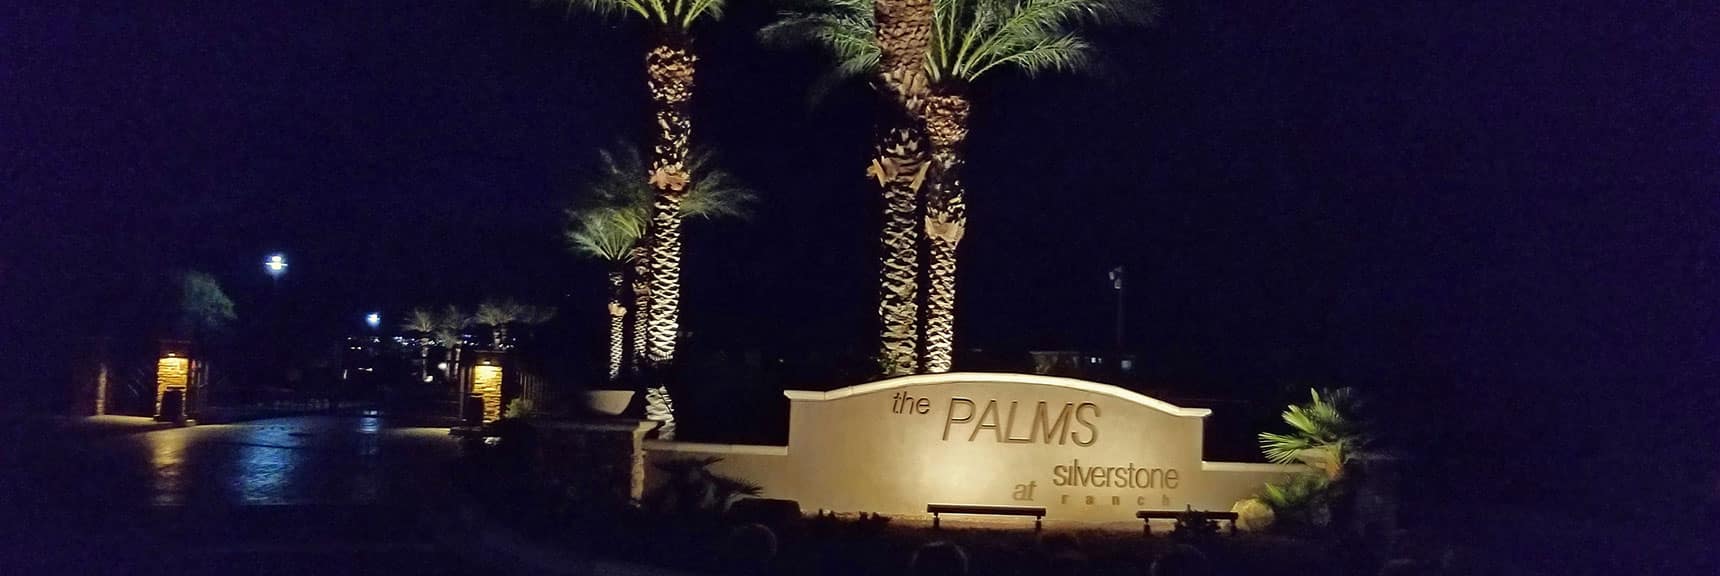 Arrival at The Palms at Silverstone, Location of Home! | Gass Peak Grand Crossing | Desert National Wildlife Refuge to Centennial Hills Las Vegas via Gass Peak Summit by Foot